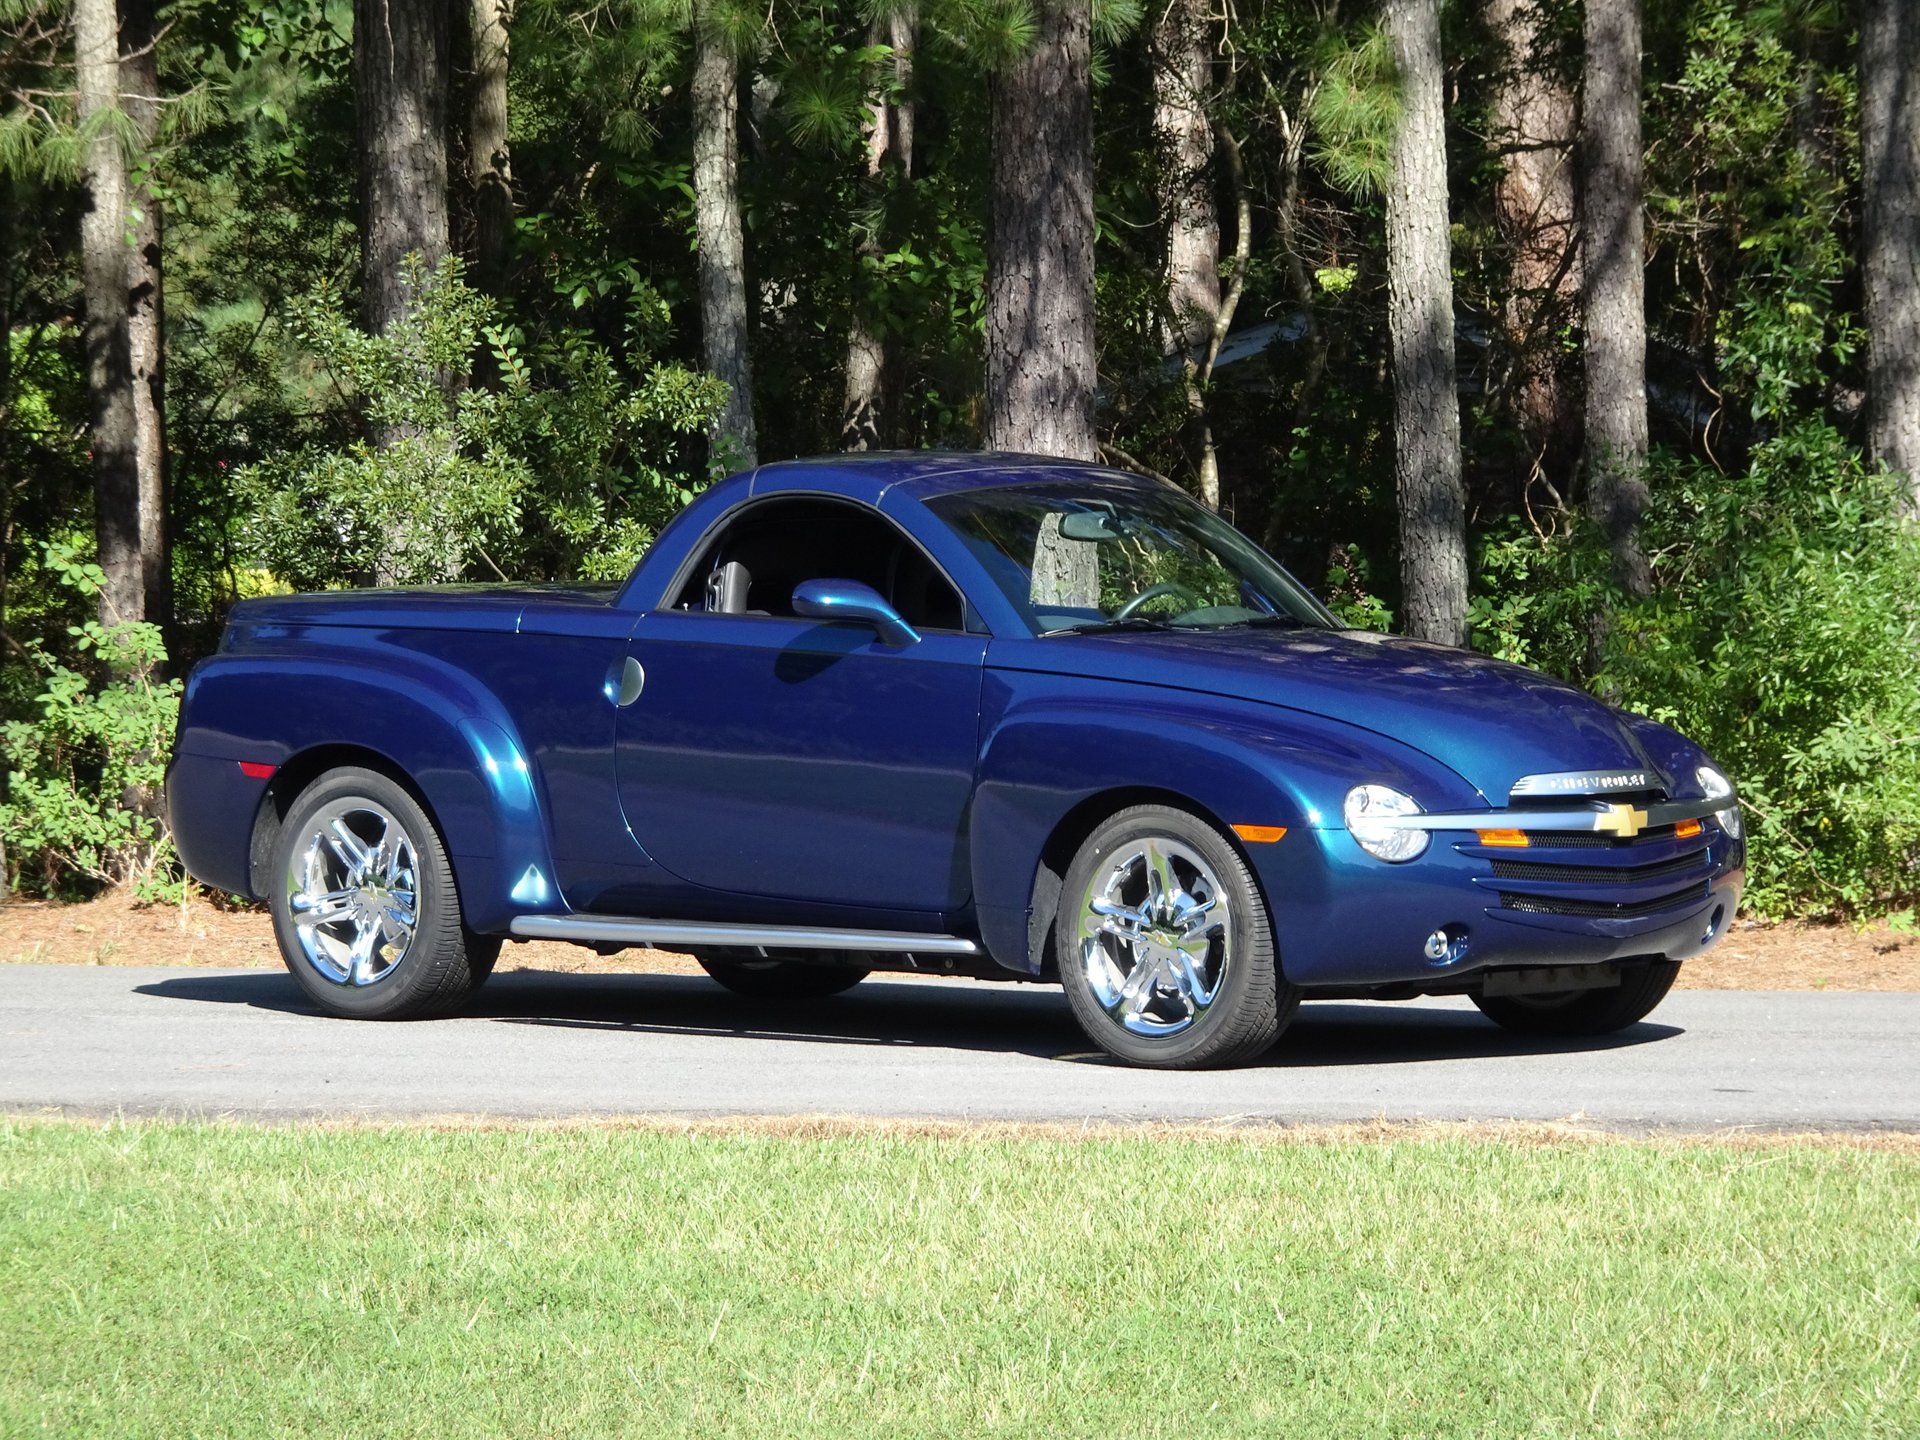 2005 Chevrolet SSR | Raleigh Classic Car Auctions